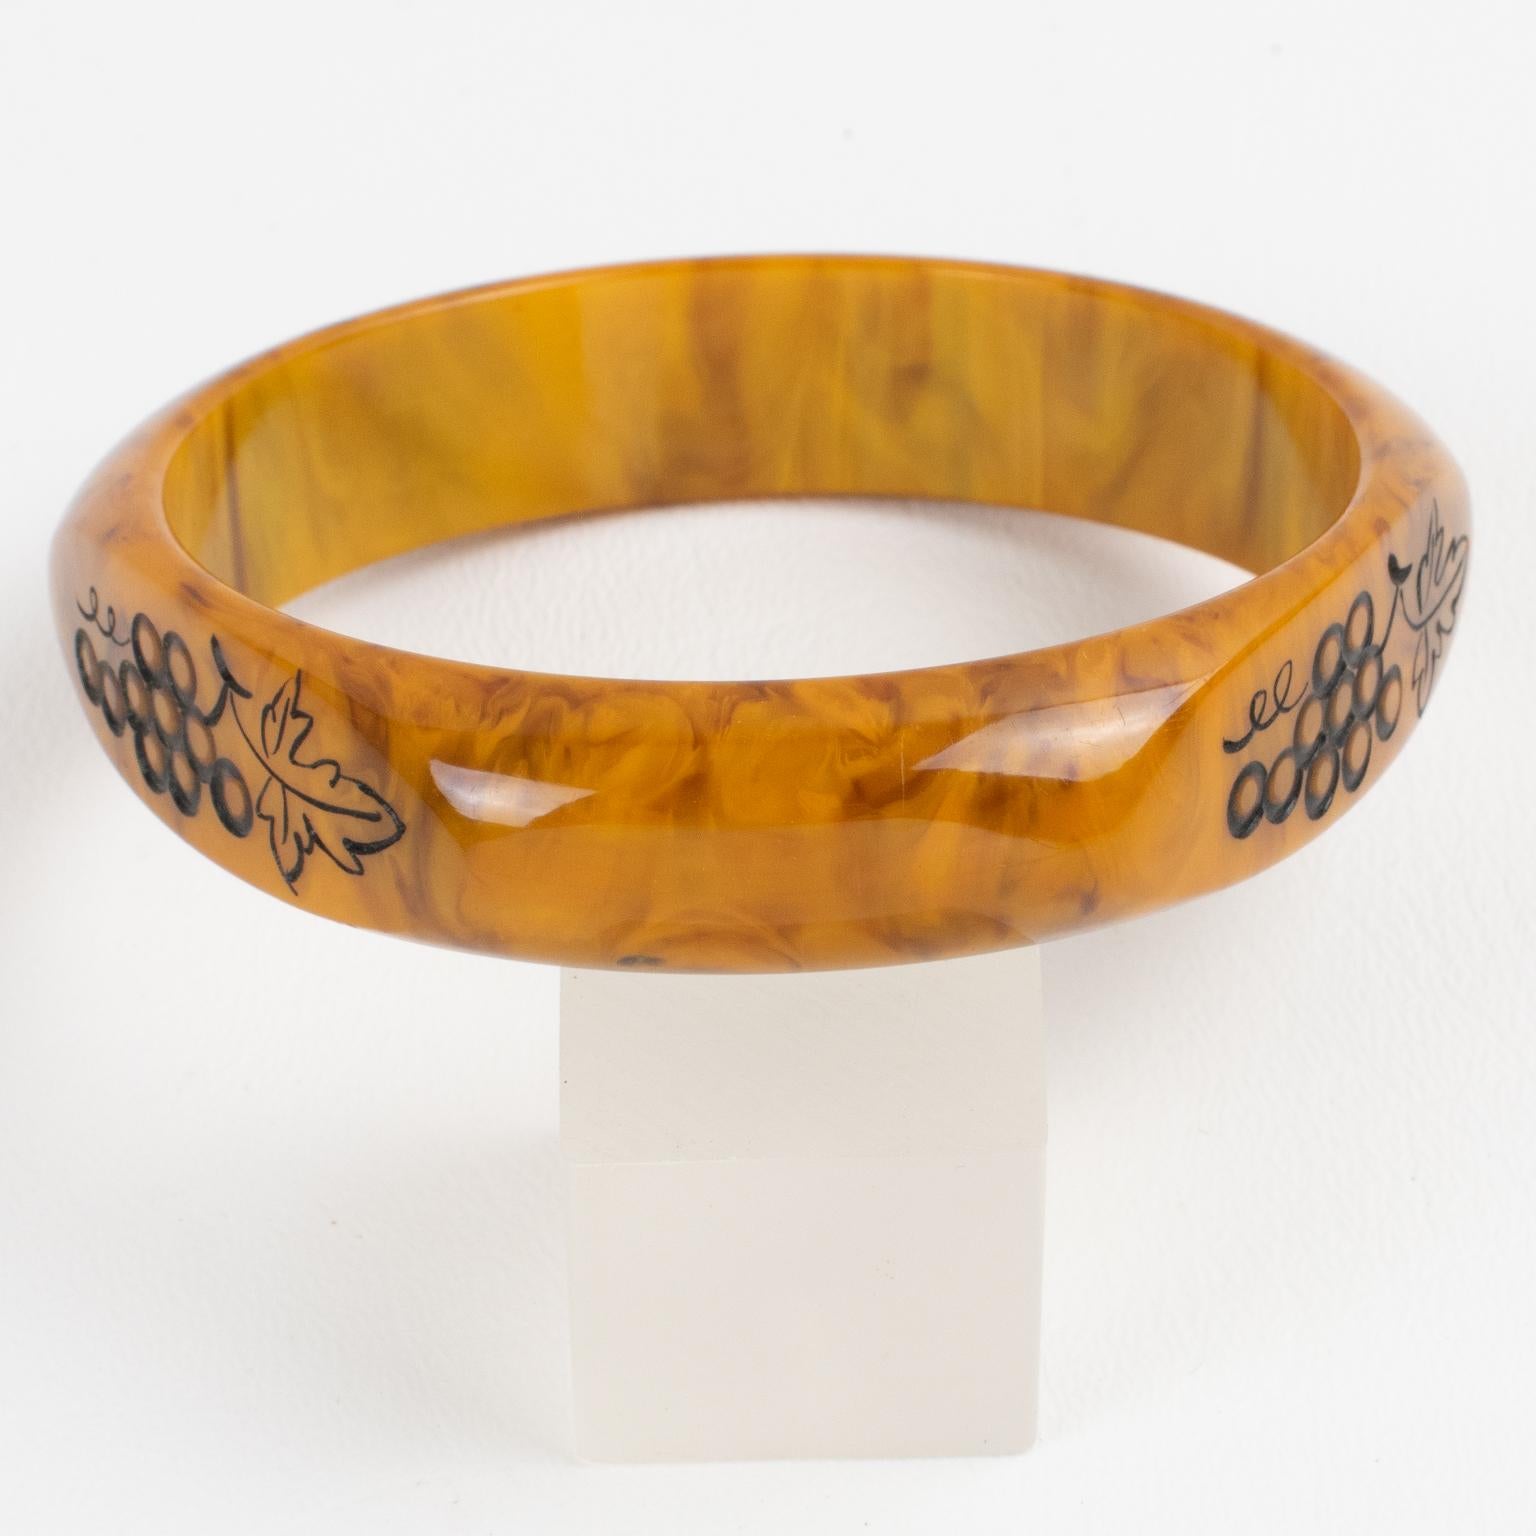 Bakelite Carved Bracelet Bangle Butterscotch and Black Marble In Excellent Condition For Sale In Atlanta, GA